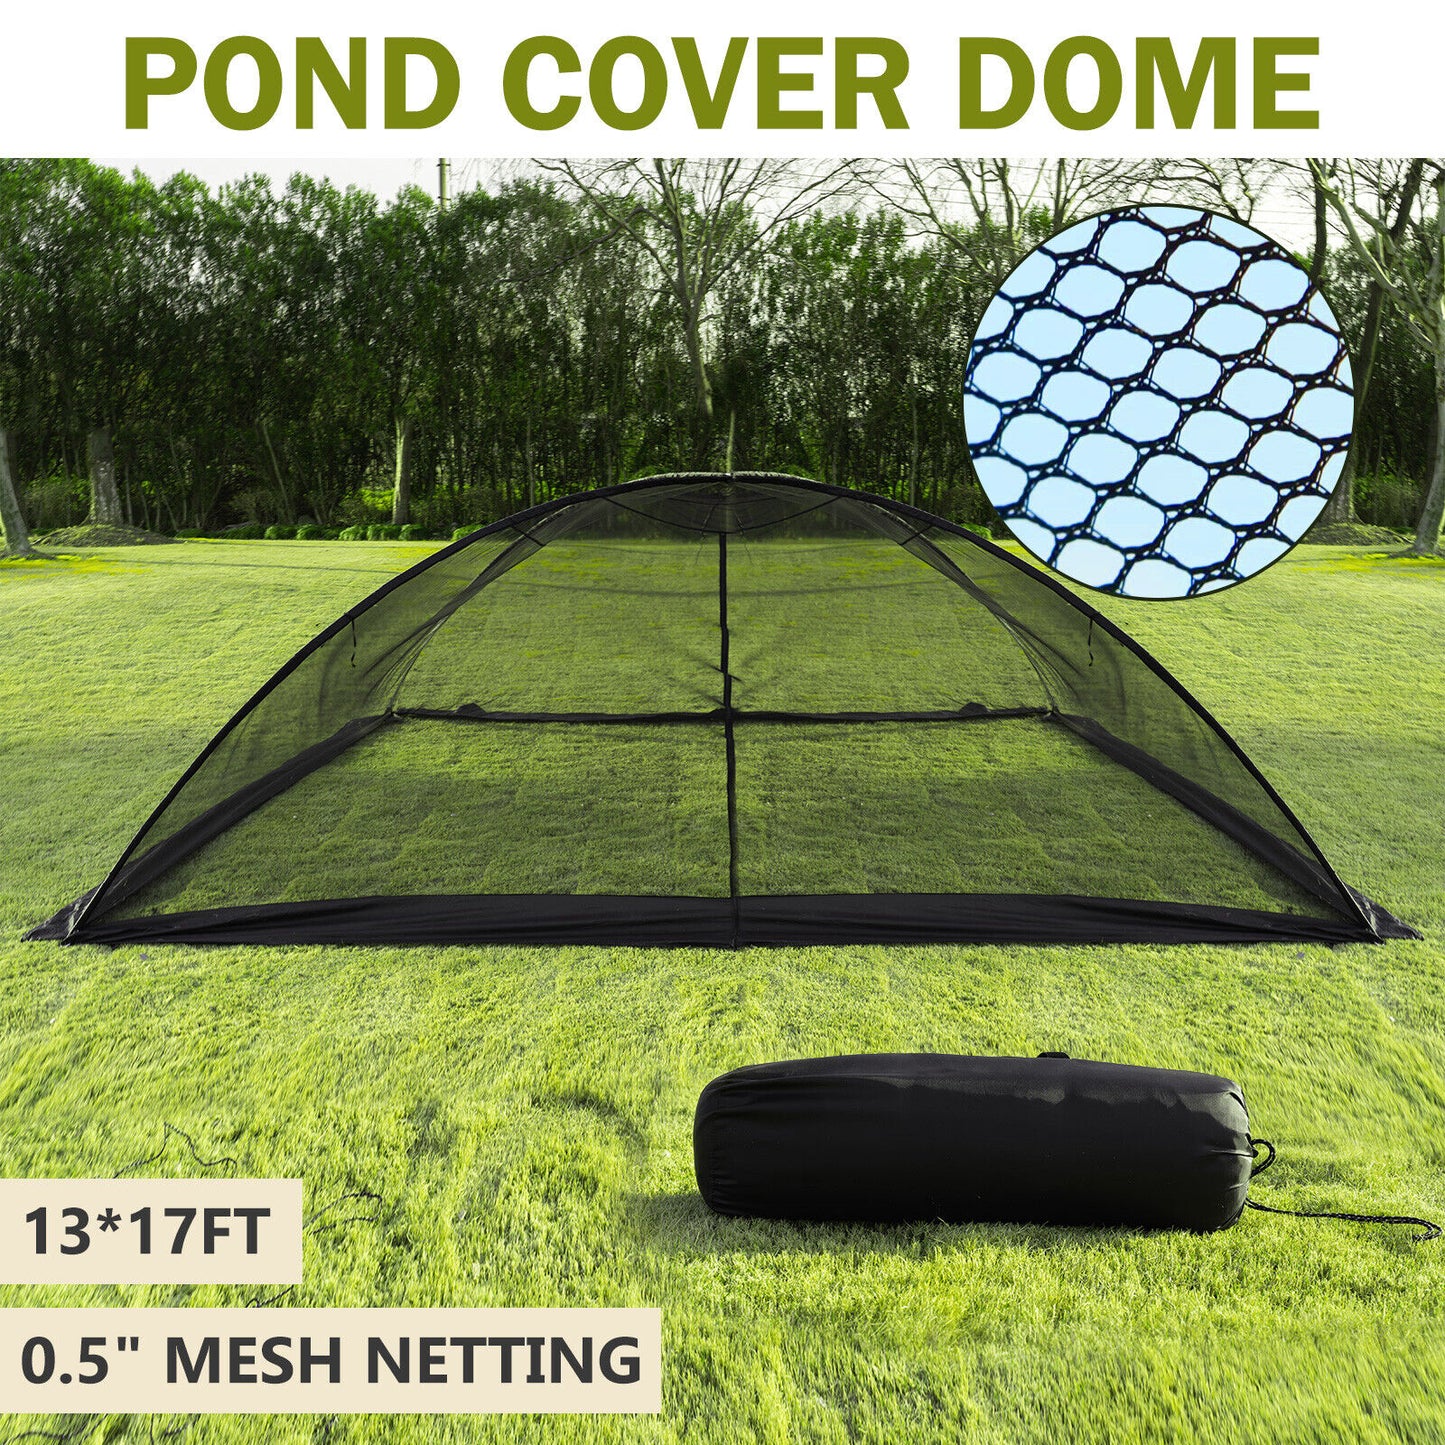 Pond Cover Dome Garden Pond Net 13x17 FT Netting Covers for Leaves w/ Bag Black